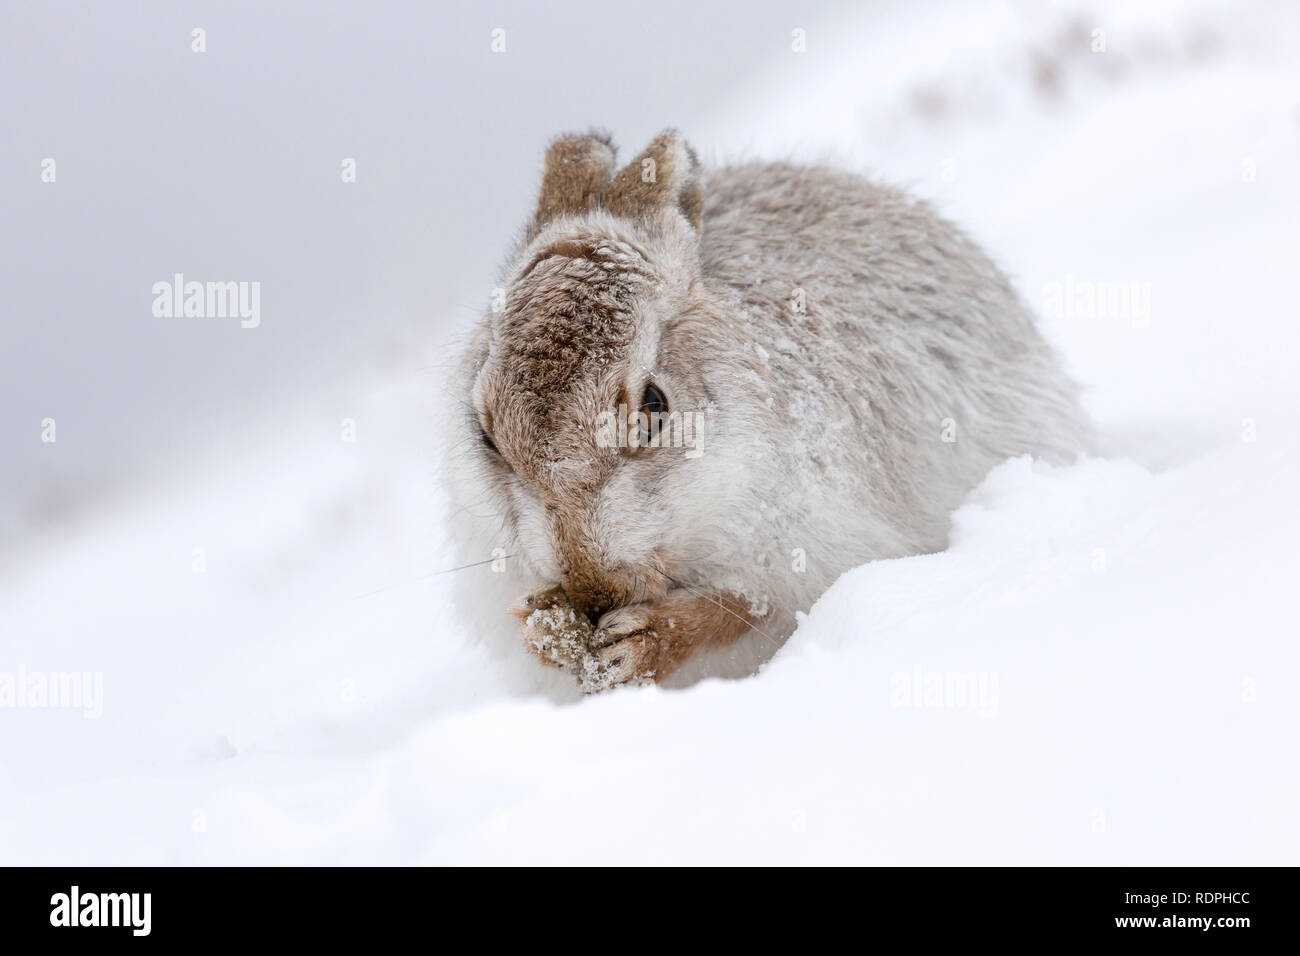 Mountain hare / Alpine hare / snow hare (Lepus timidus) in white winter pelage grooming fur Stock Photo